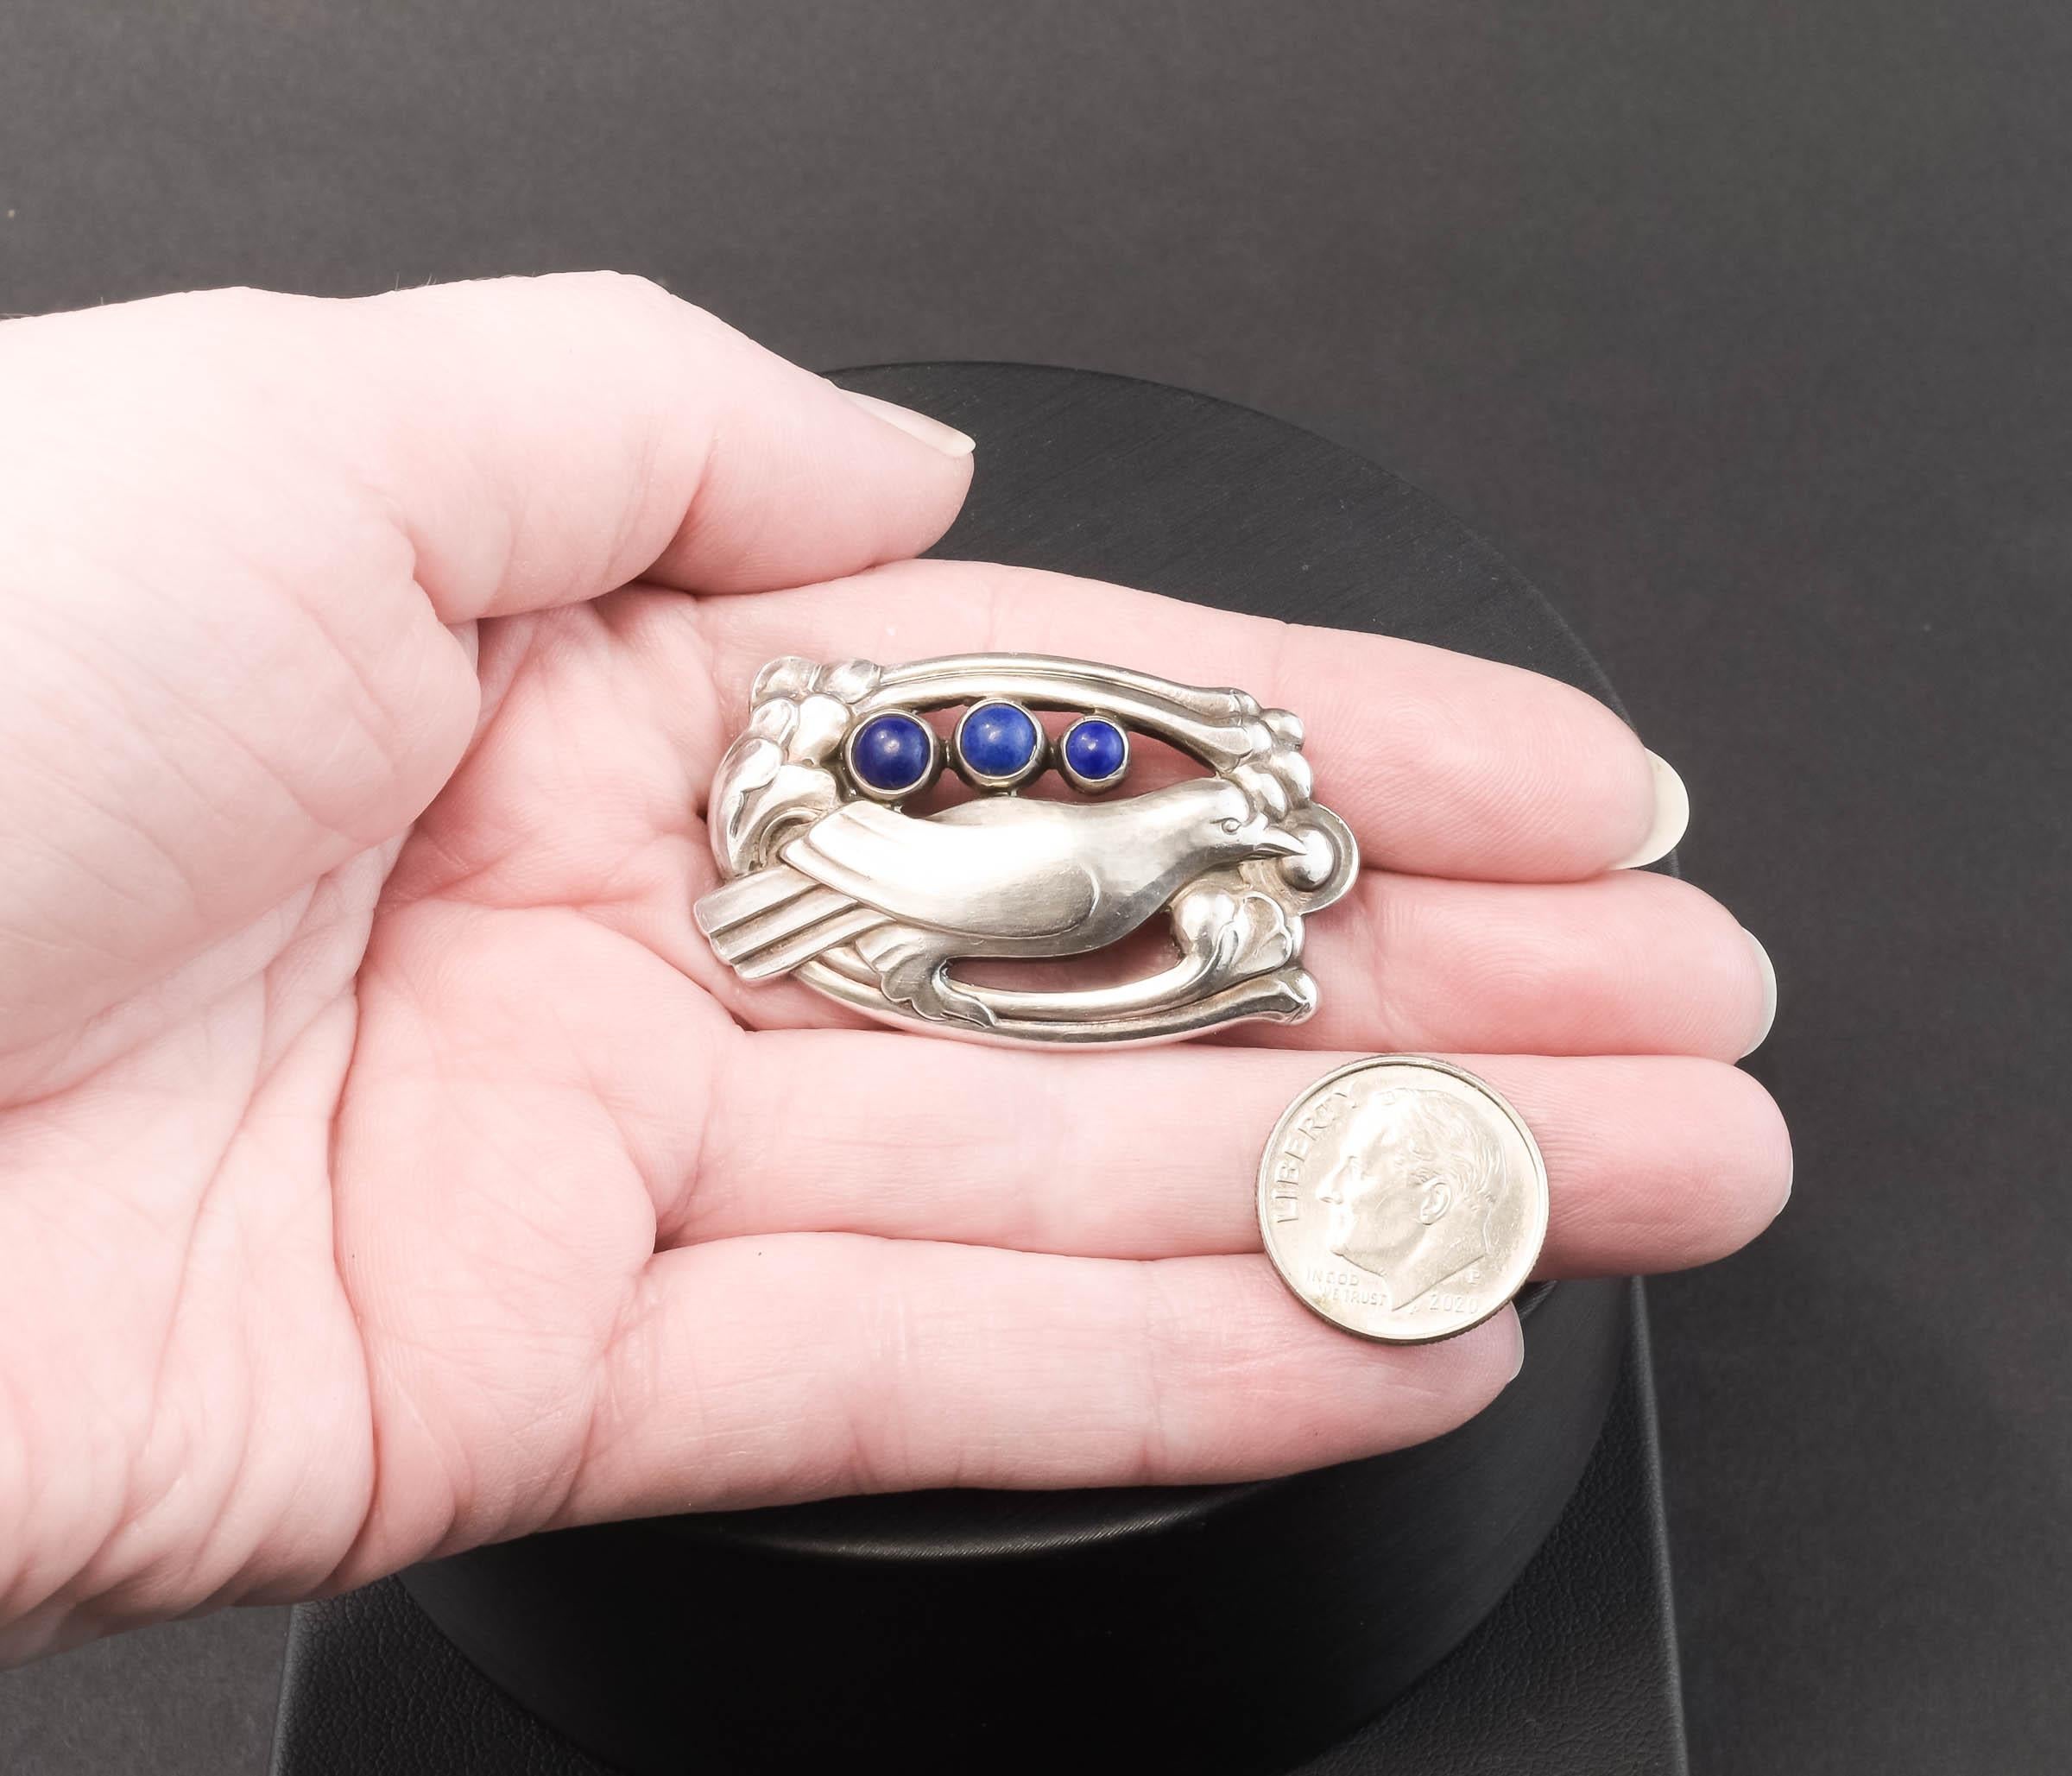 Georg Jensen Sterling Silver Bird Brooch with Lapis Lazuli, circa 1933 - 1944 In Good Condition For Sale In Danvers, MA